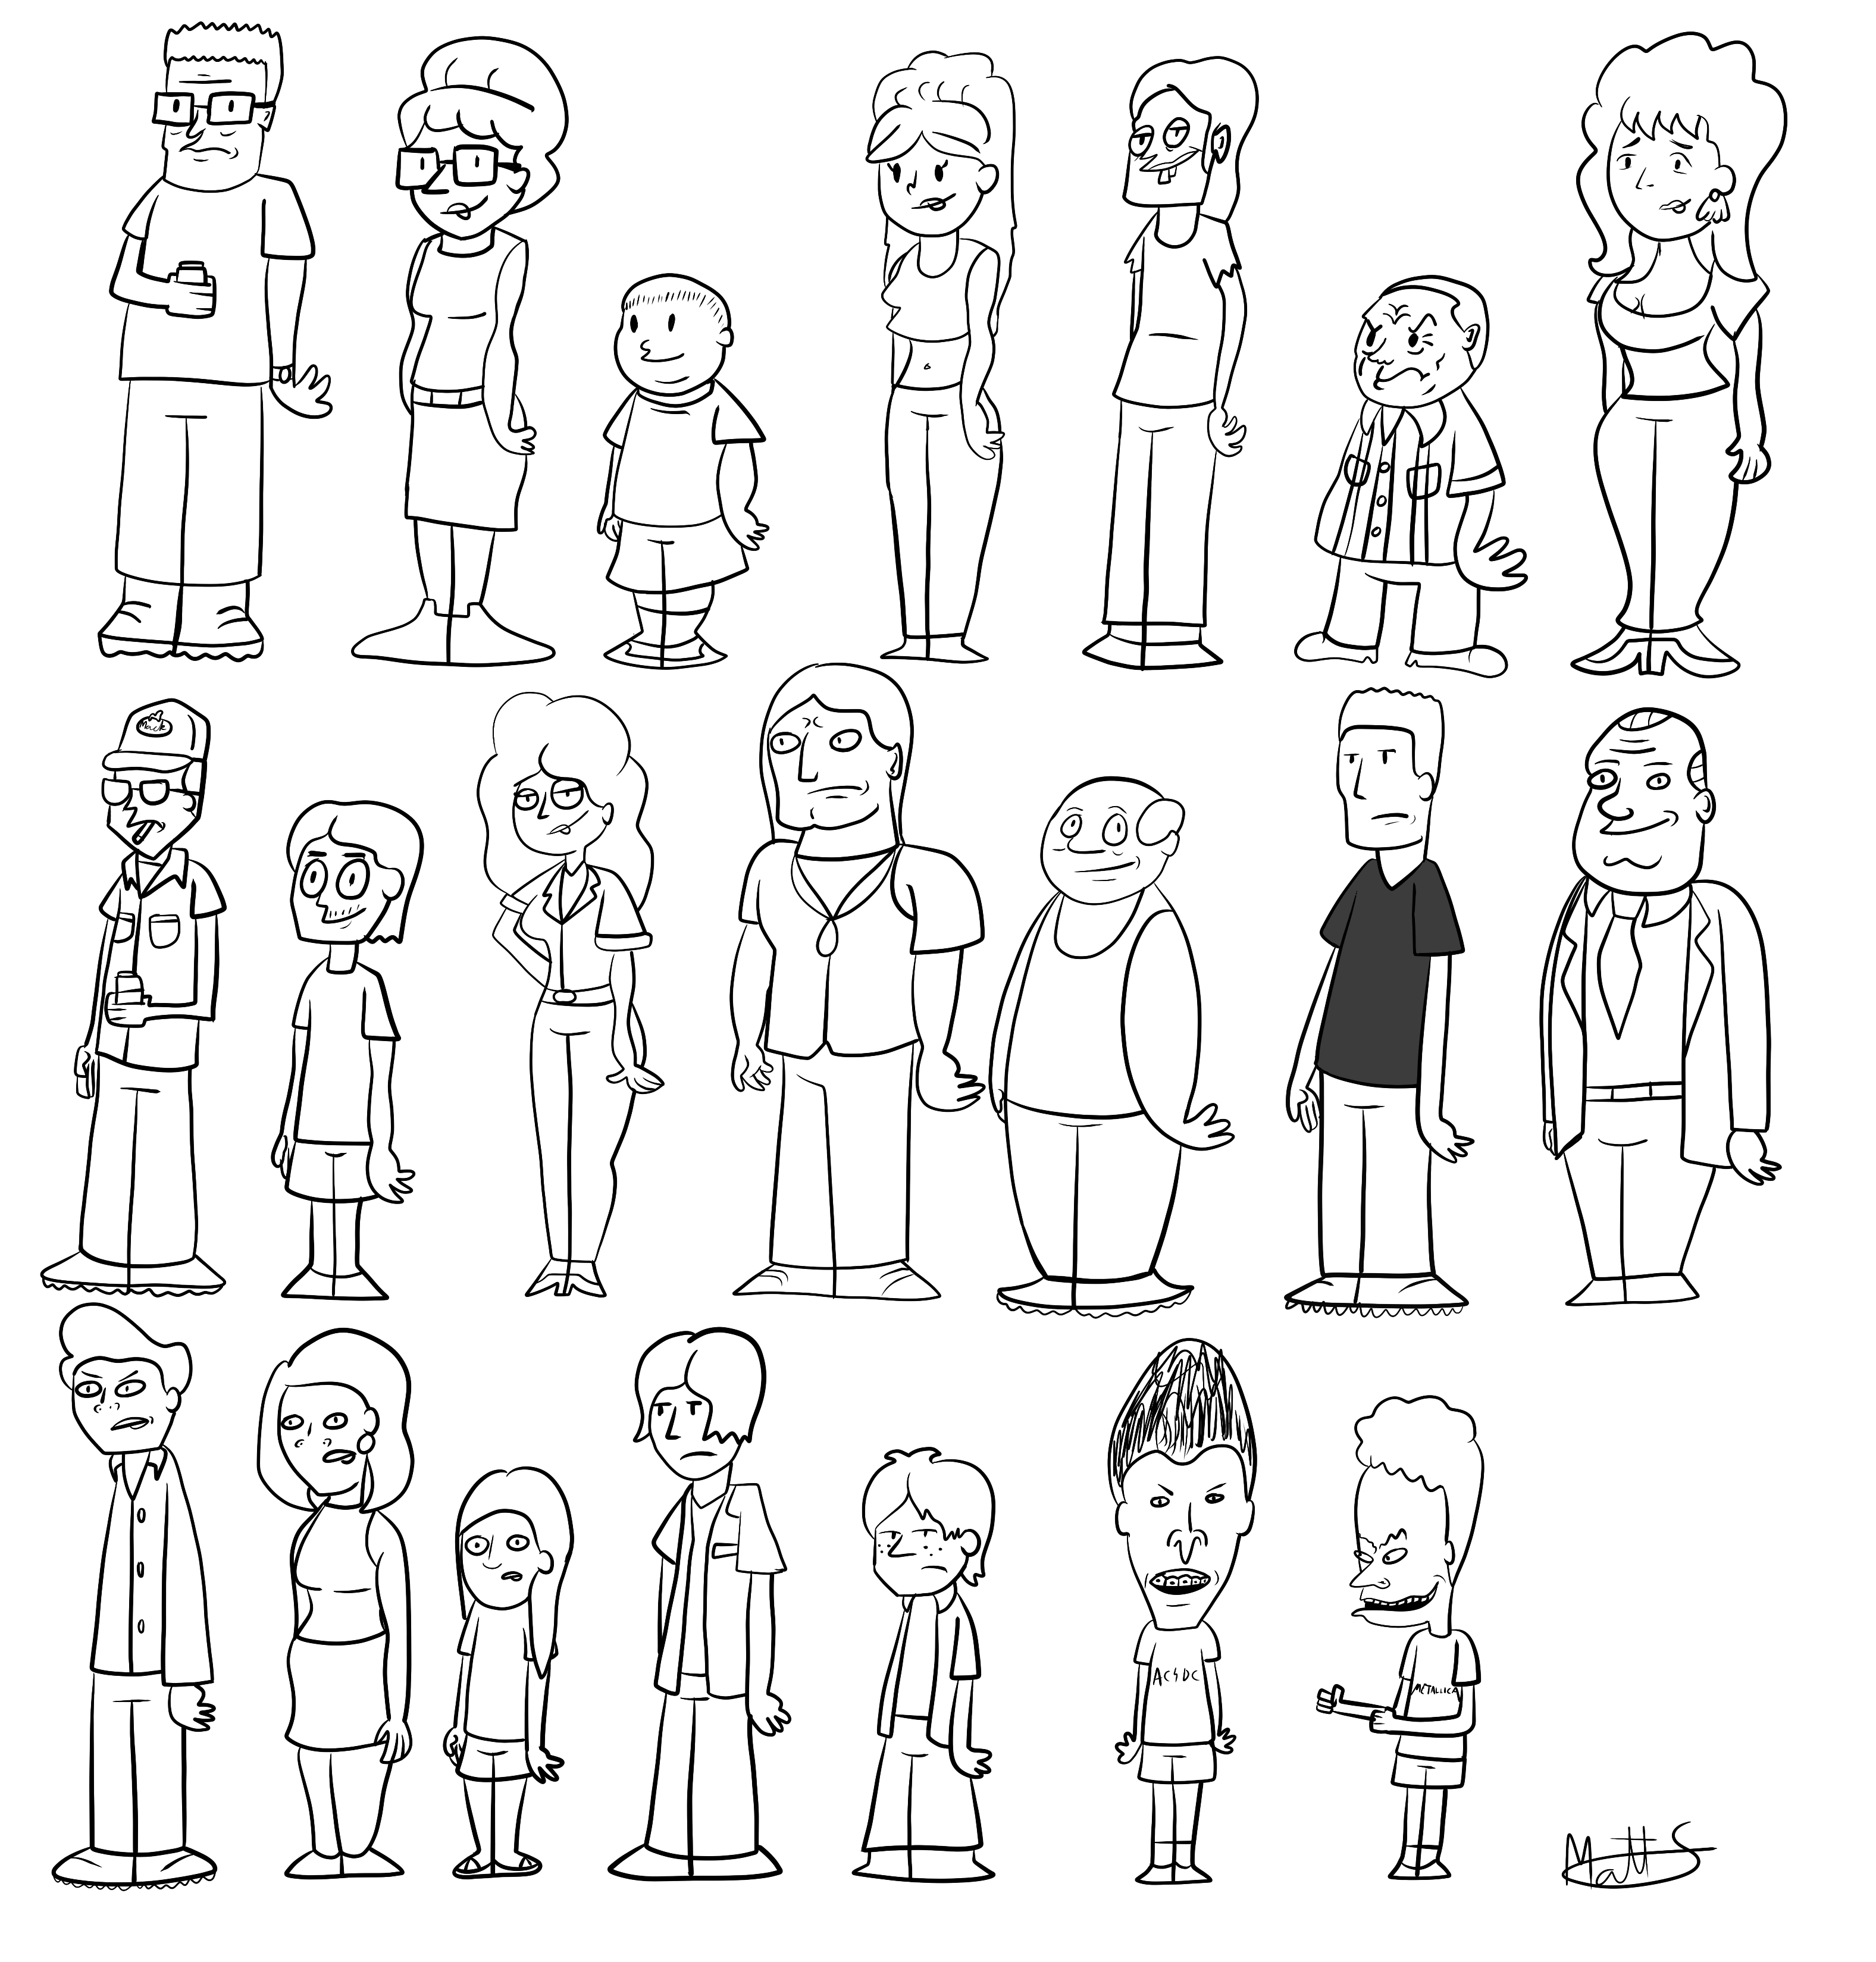 King of the Hill people (lineart only) by LWBiverse on DeviantArt